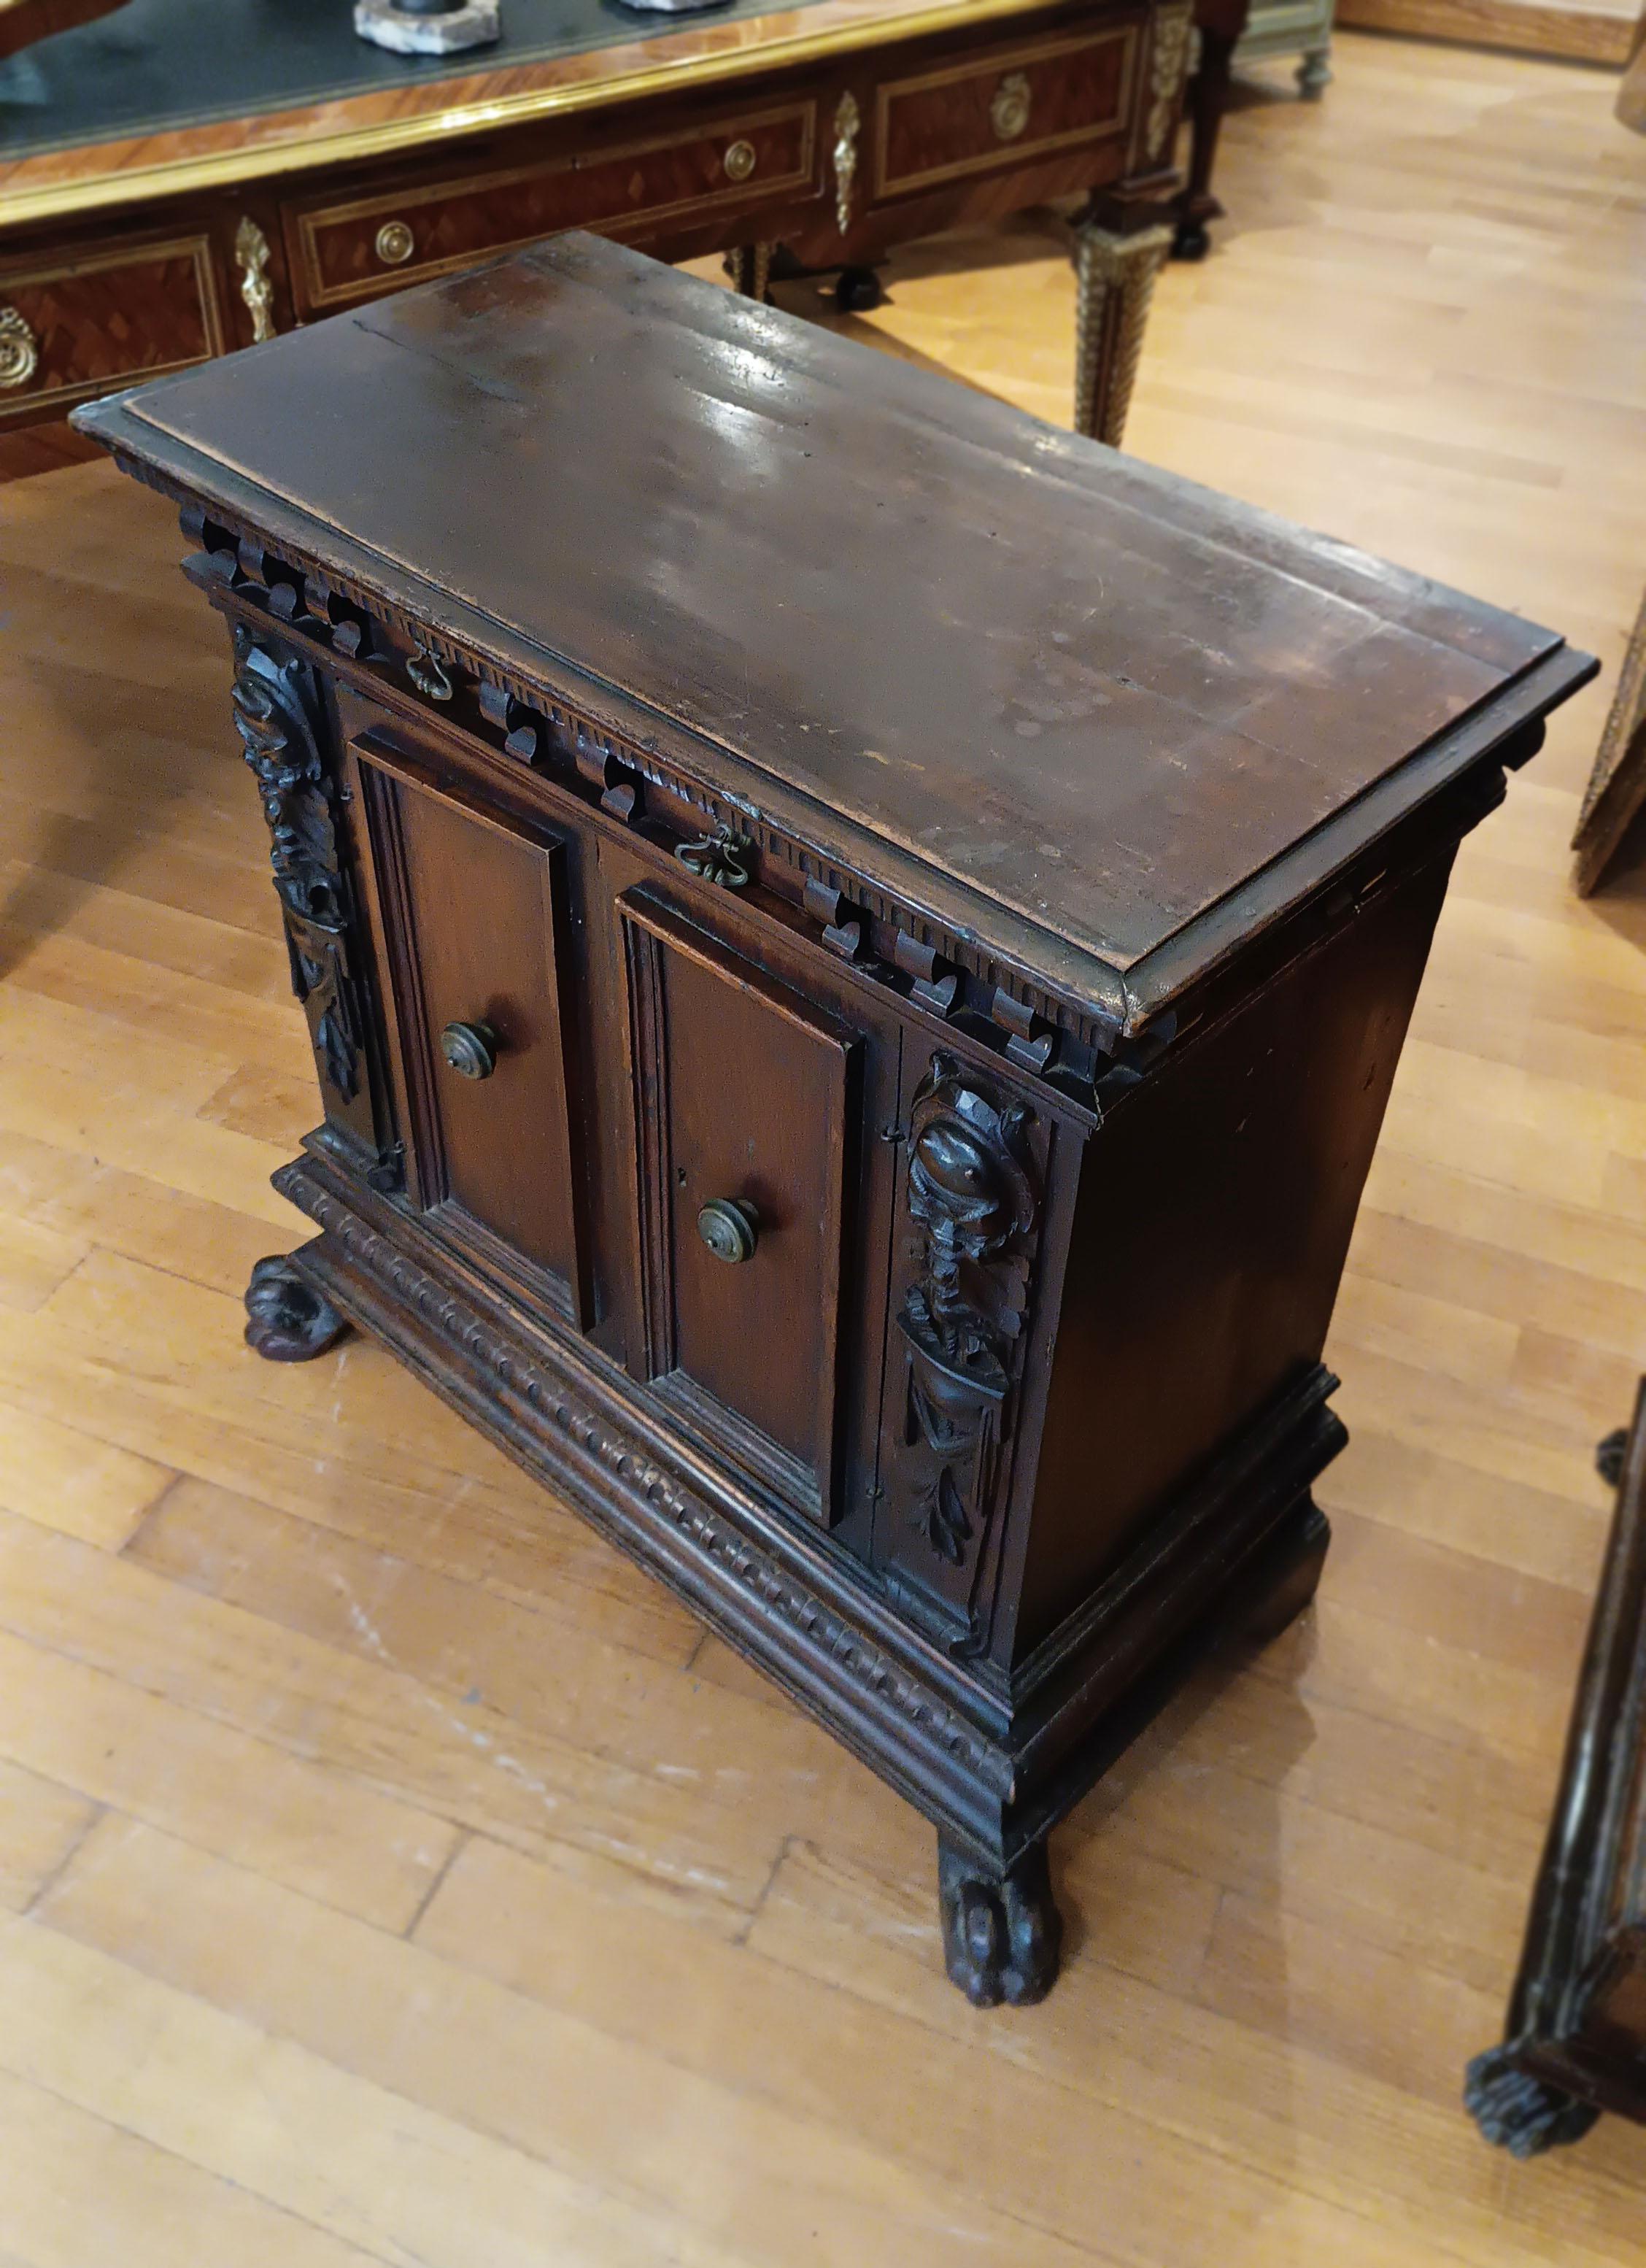 Hand-Carved 16th CENTURY RENAISSANCE SMALL SIDEBOARD IN SOLID WALNUT